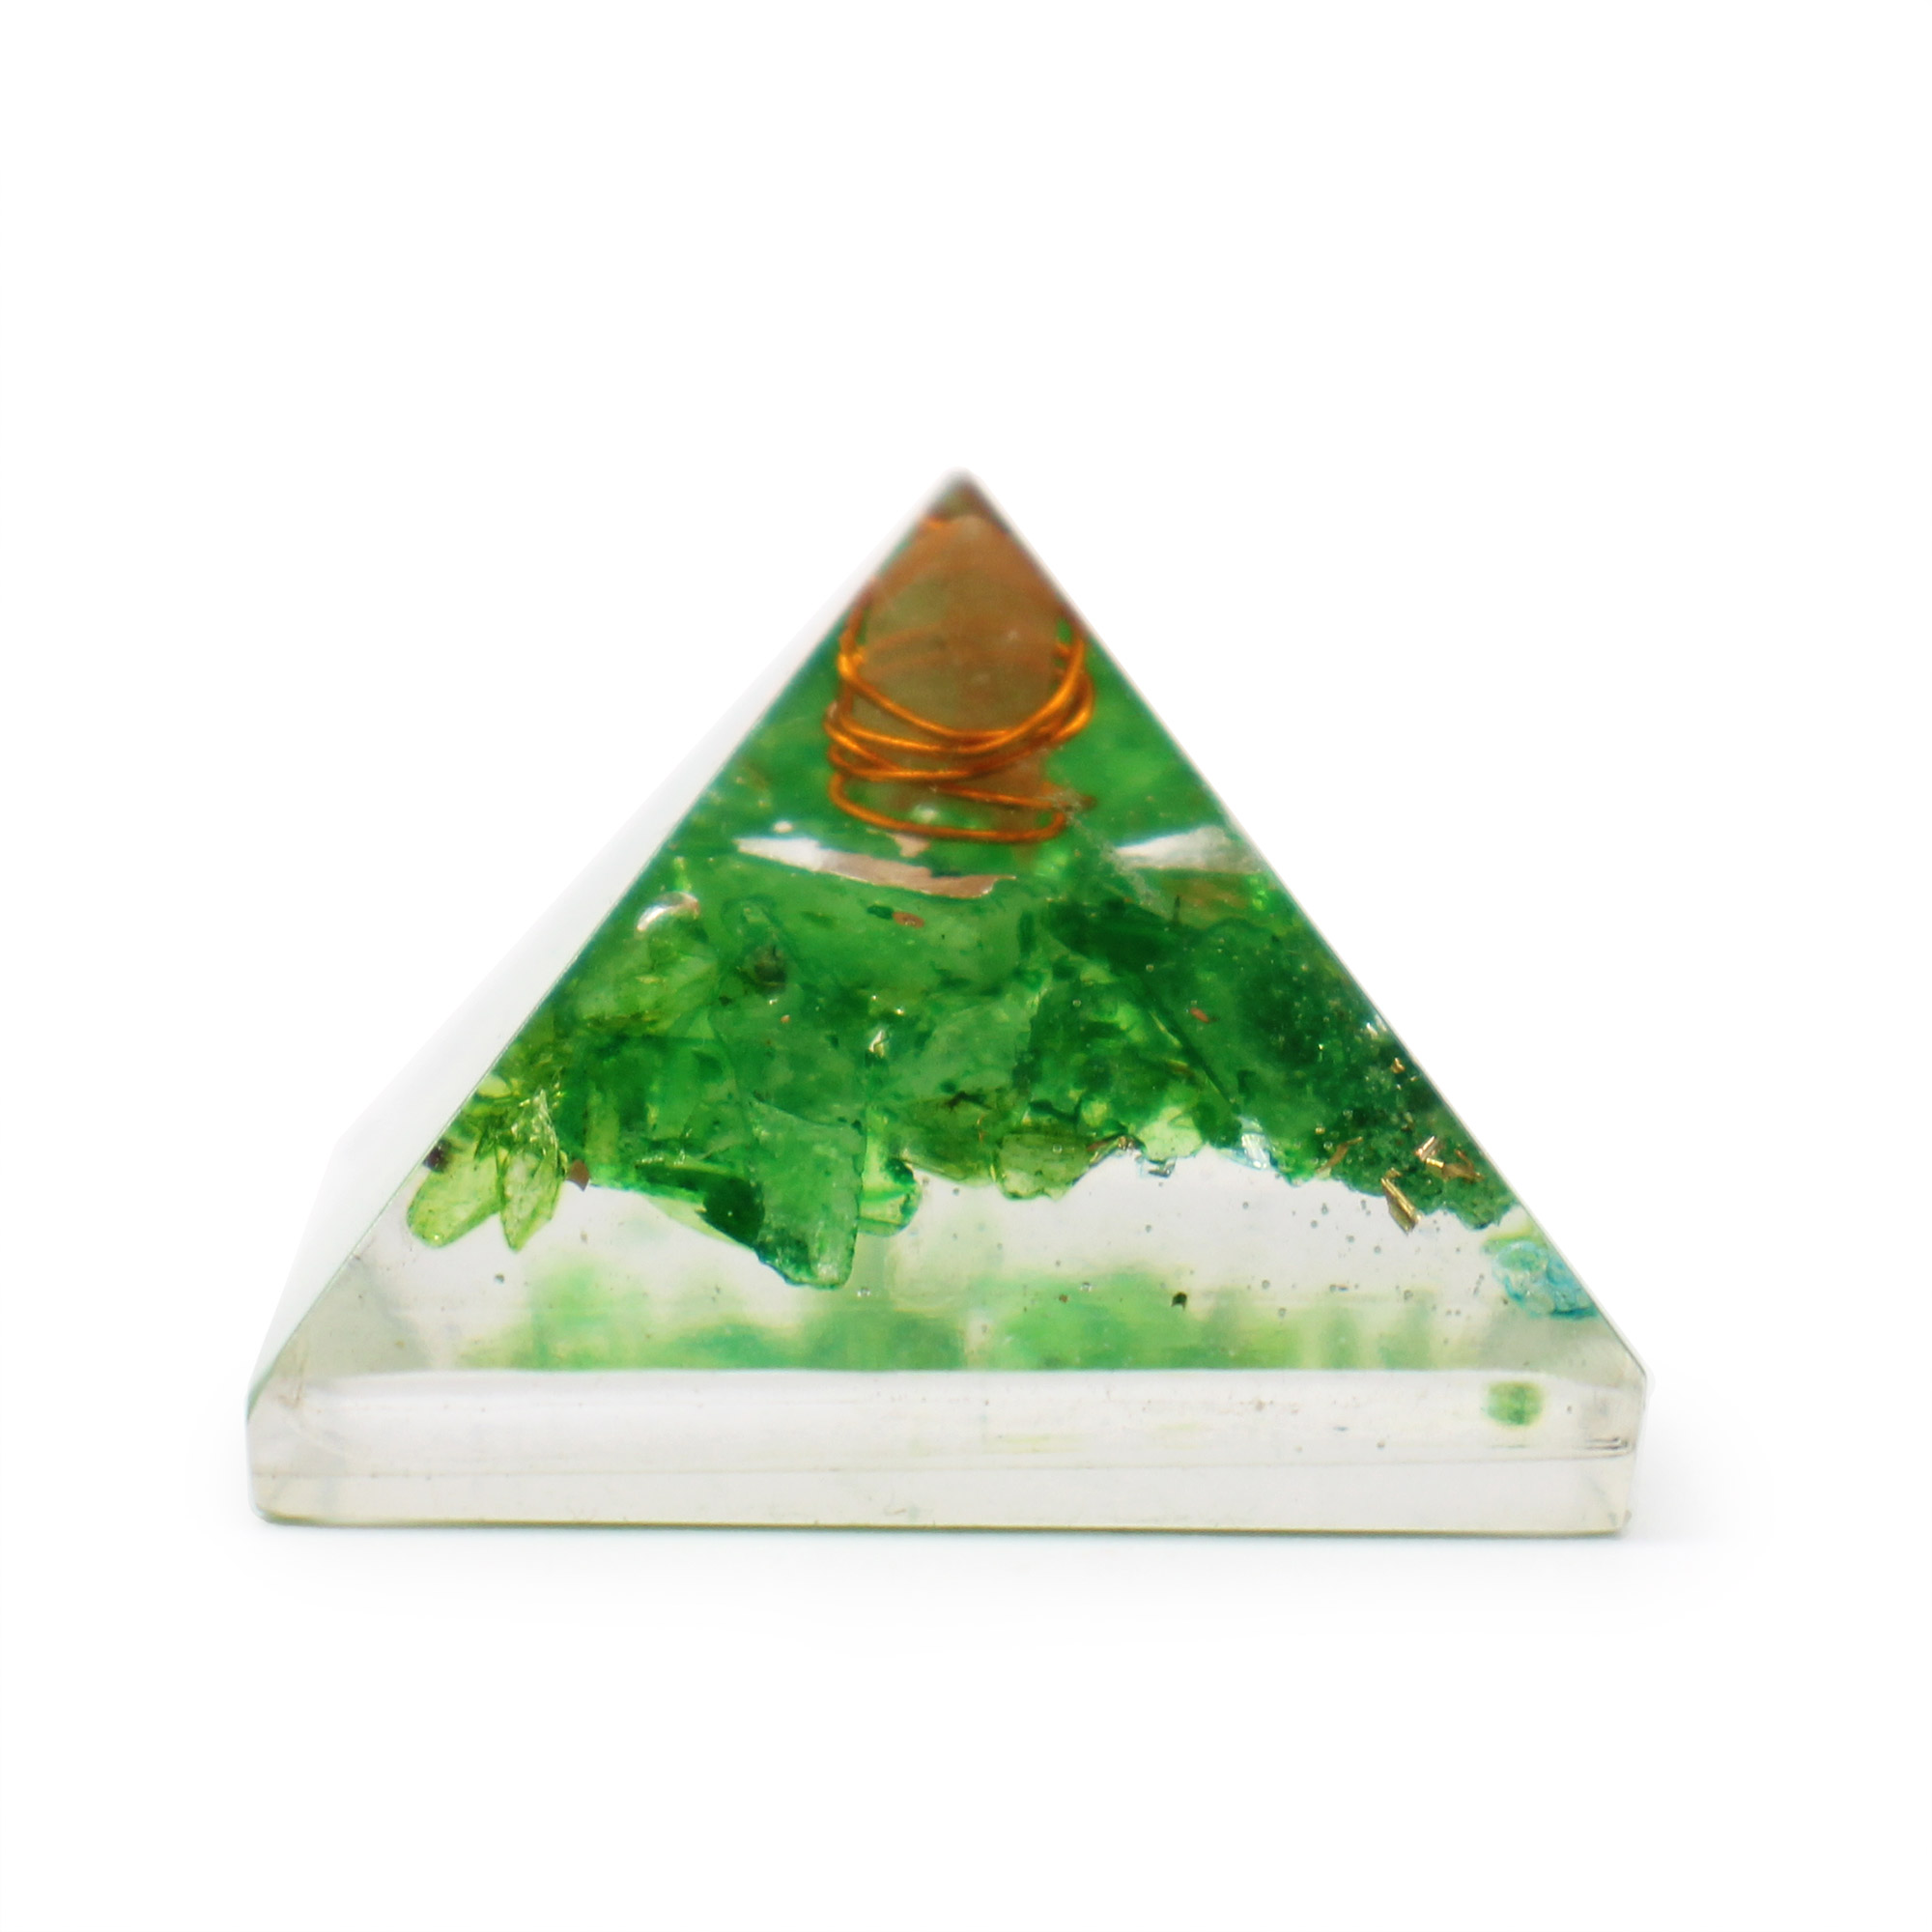 Sm Orgonite Pyramid 25mm Gemchips and Copper (assorted colours/designs)